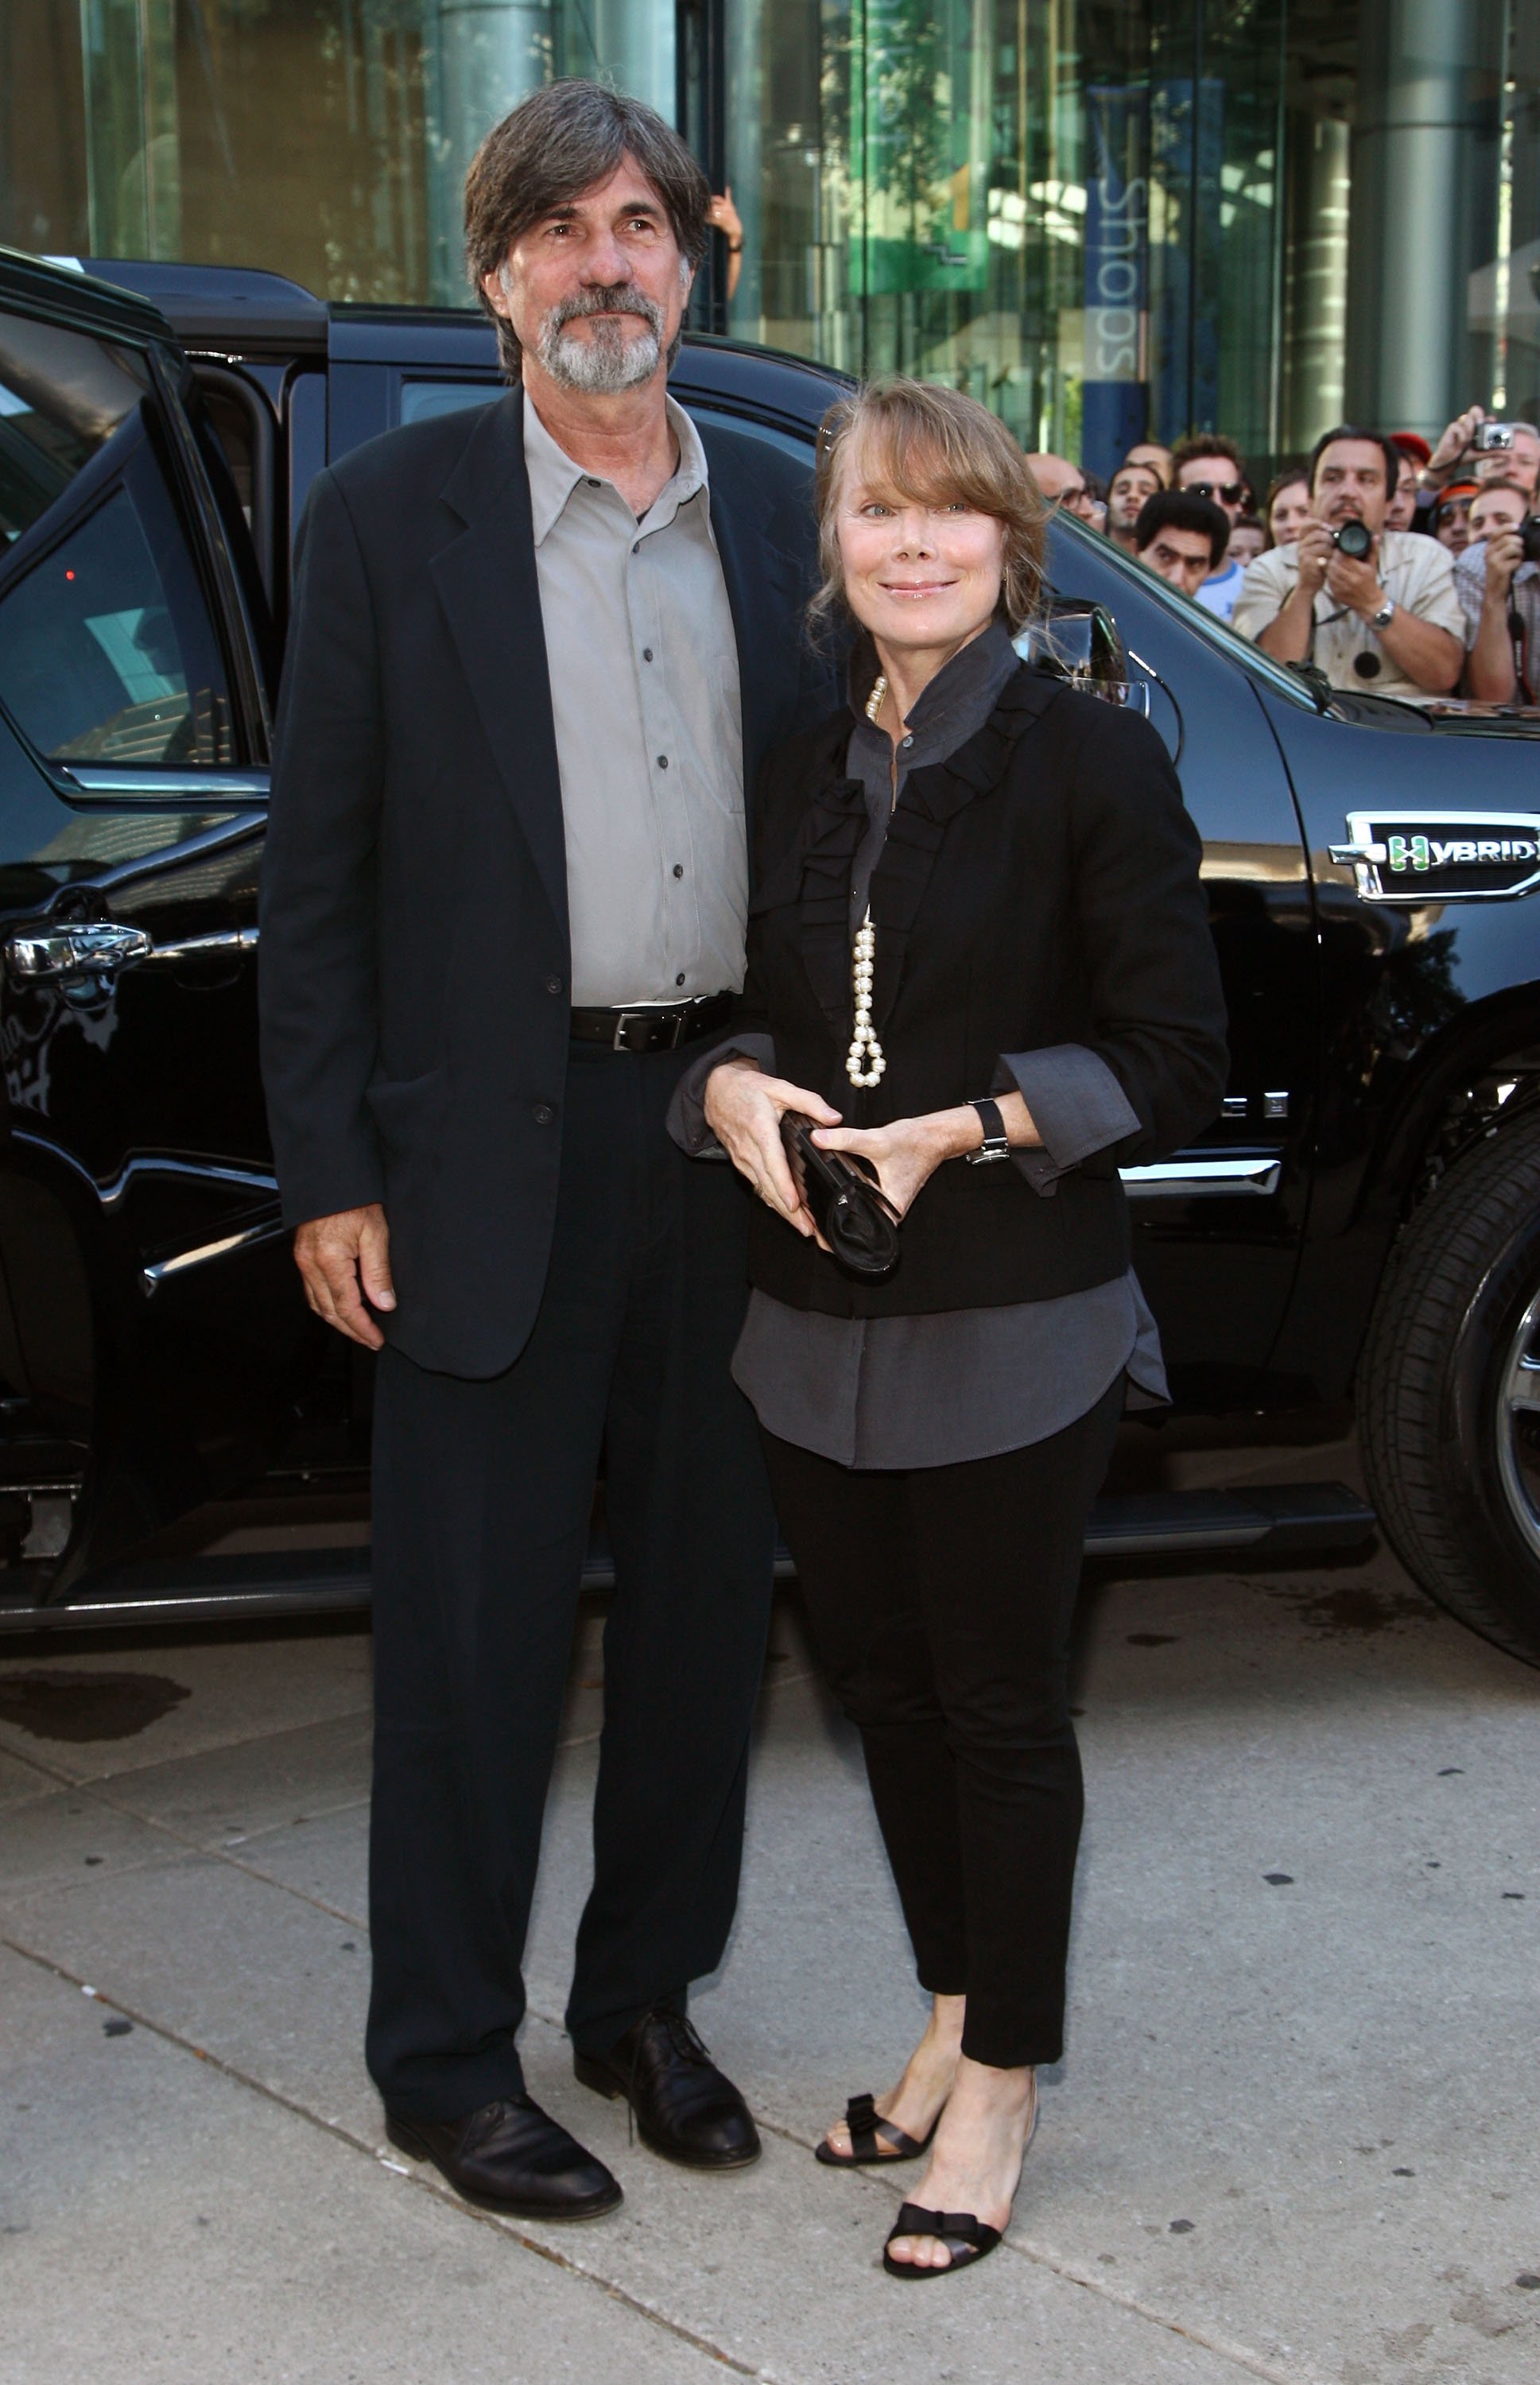 Sissy Spacek and Jack Fisk during the 2009 Toronto International Film Festival. | Photo: Getty Images